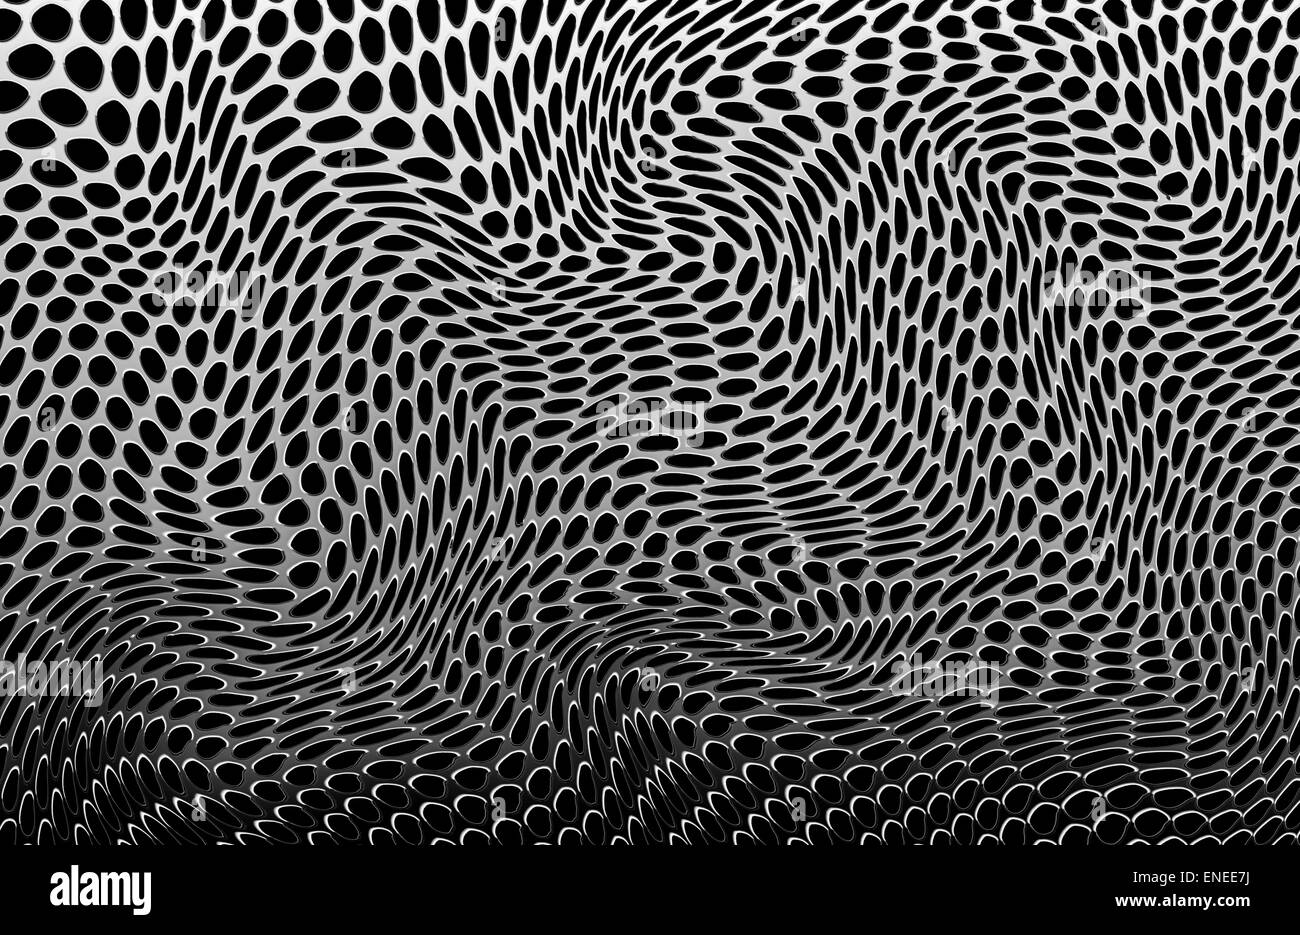 Illustration of a sheet of distorted metallic holes, twisted and curved in an abstract pattern to form a complex warping random effect. Stock Photo